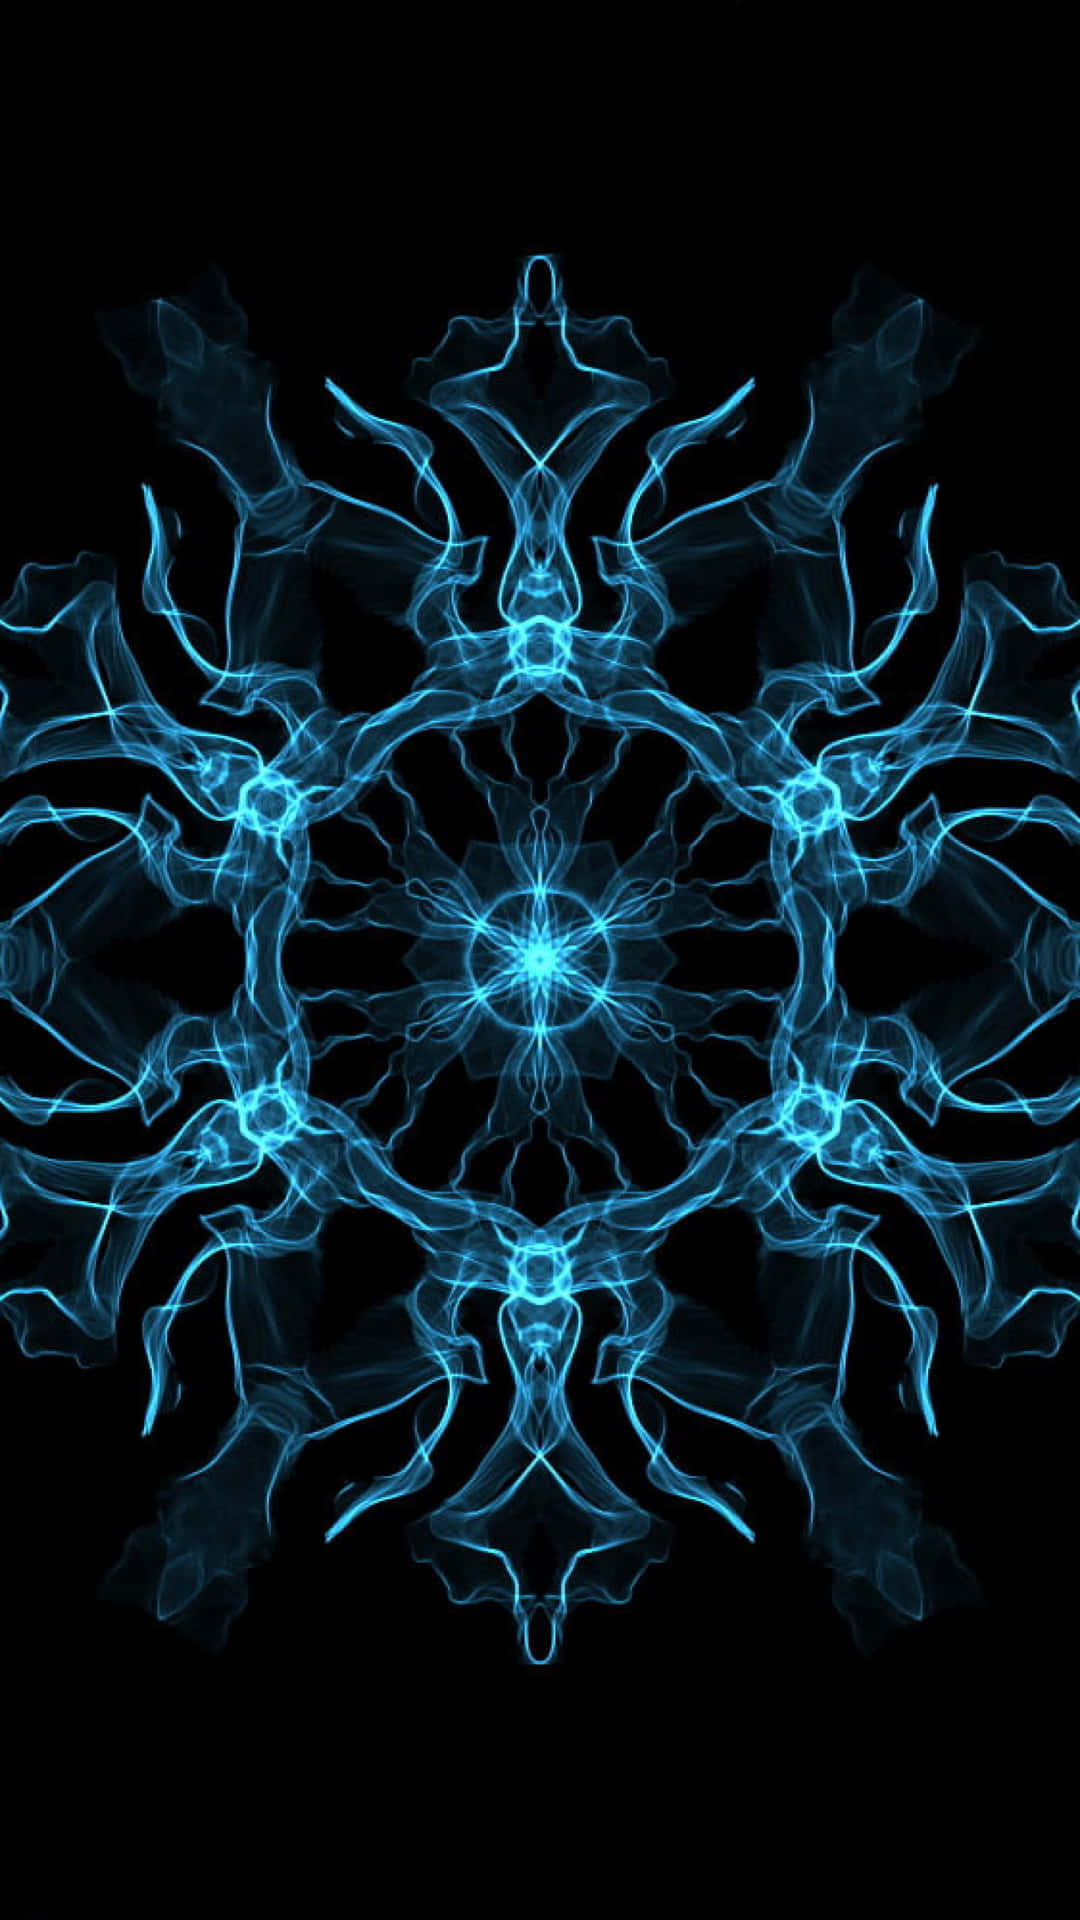 A Blue Abstract Design On A Black Background